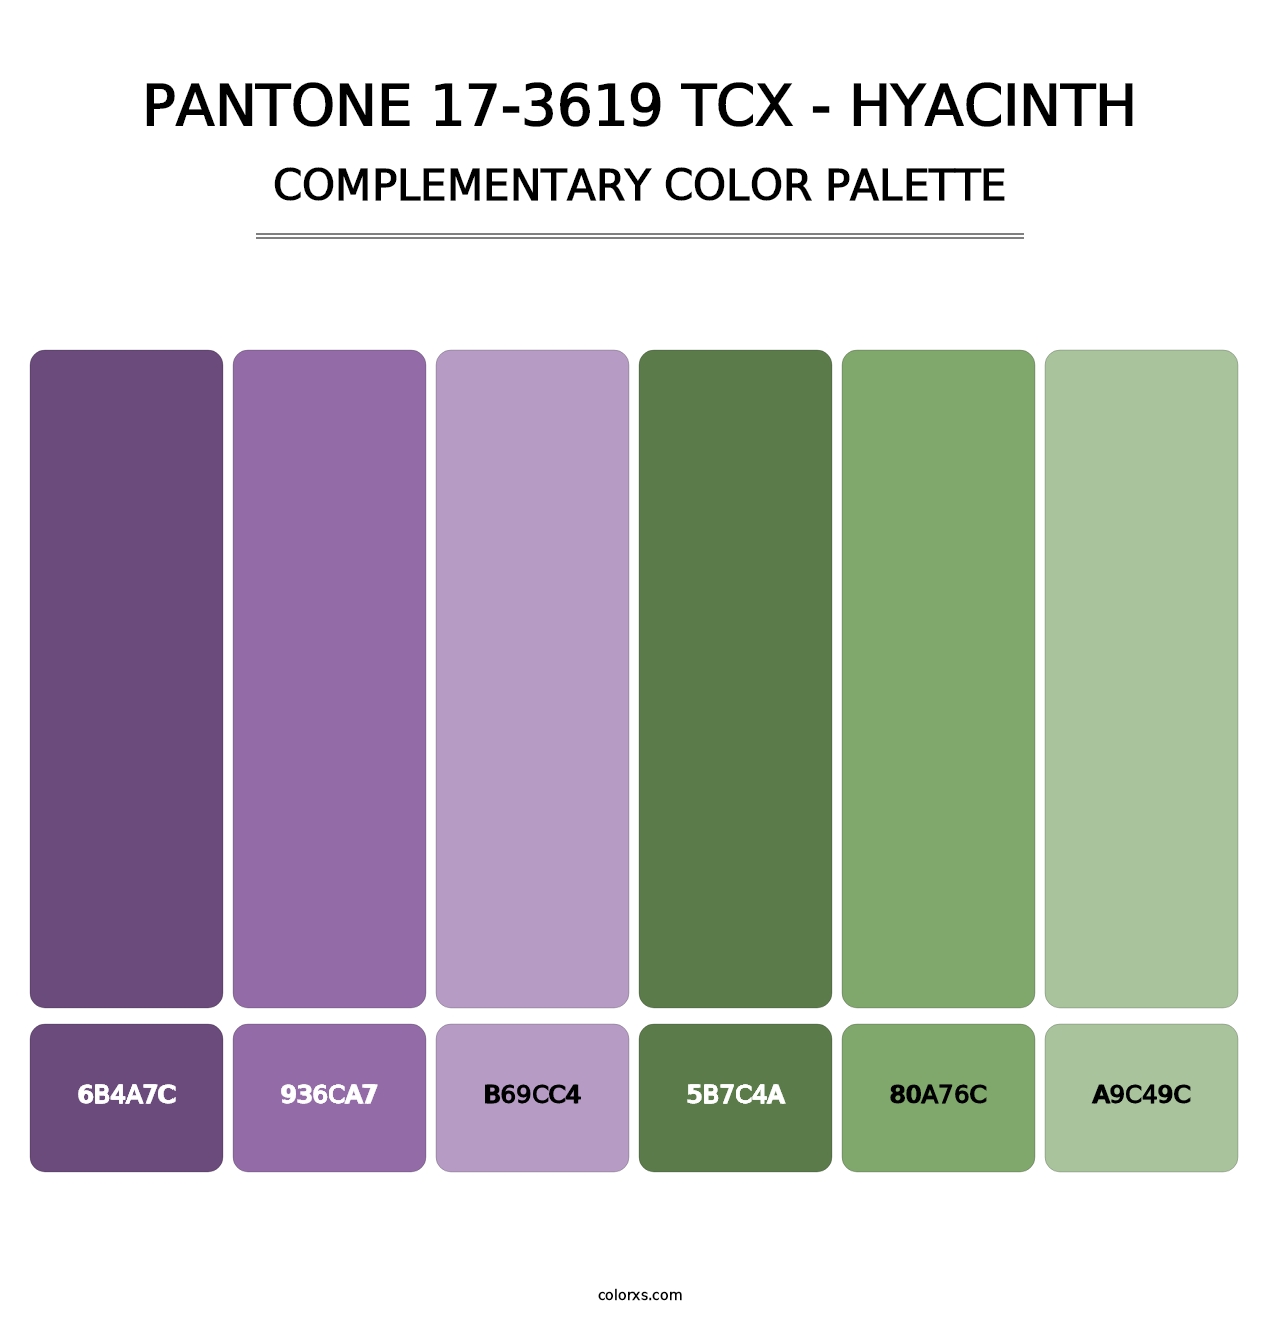 PANTONE 17-3619 TCX - Hyacinth - Complementary Color Palette